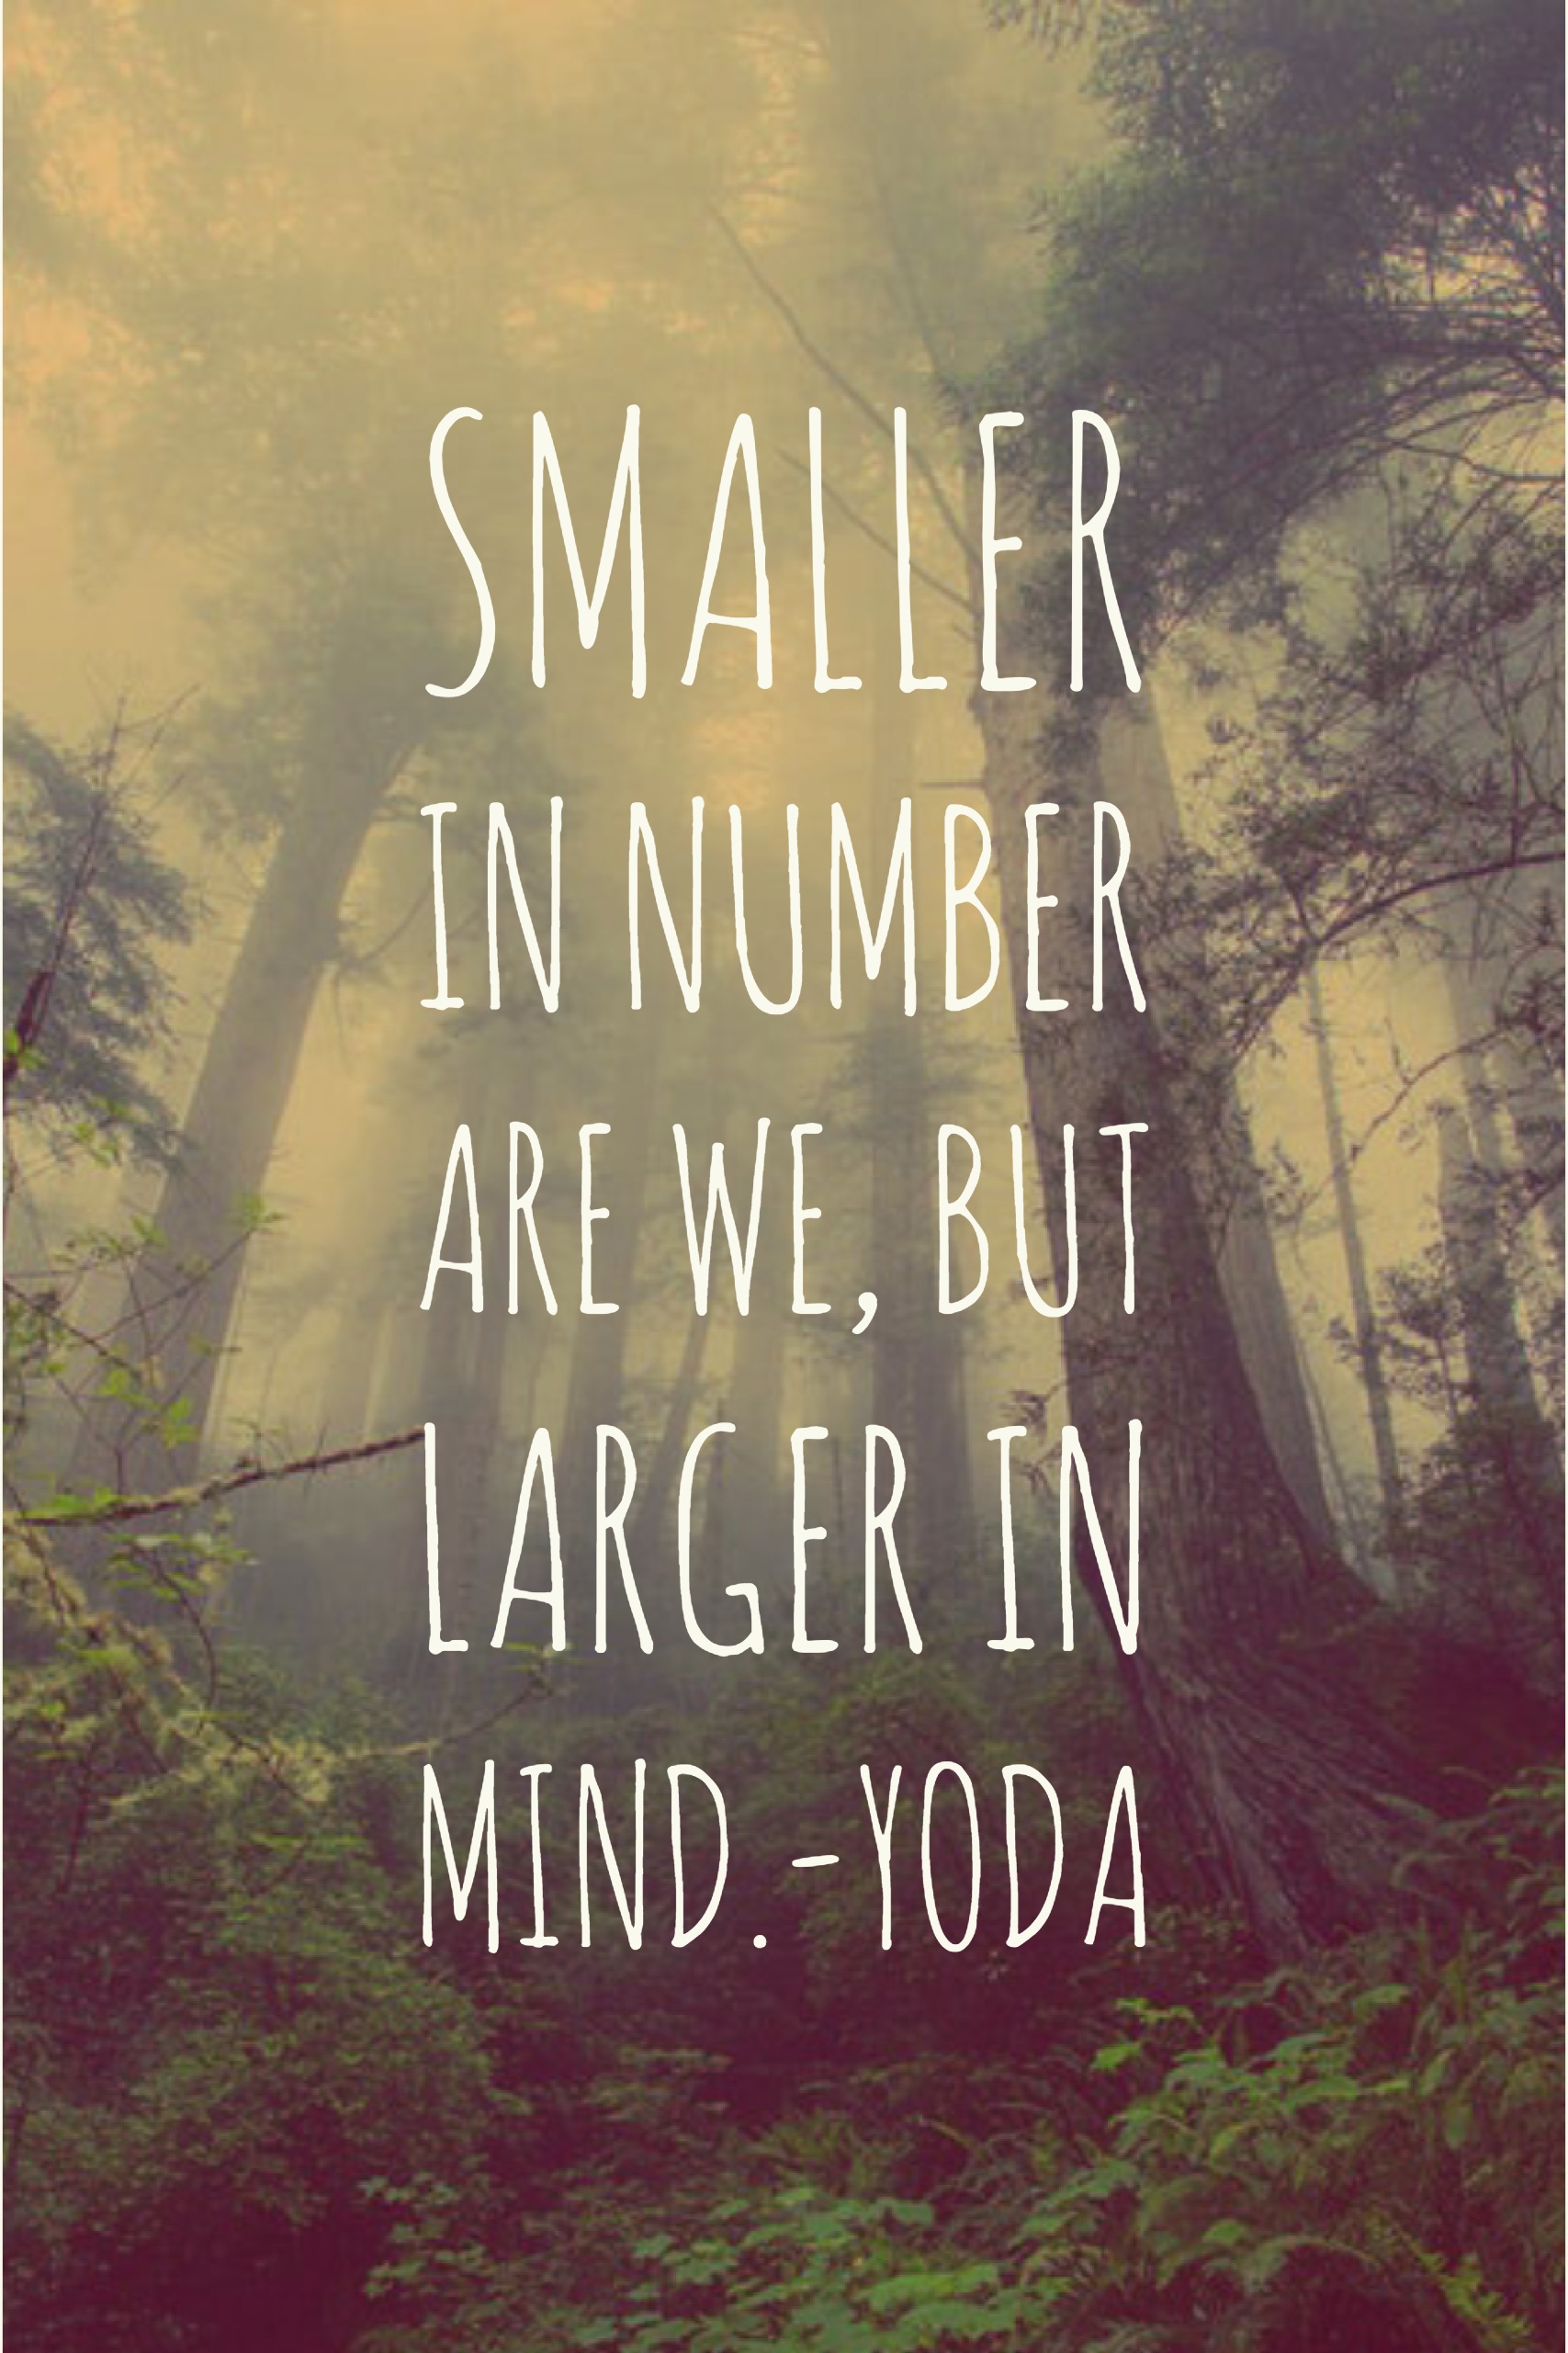 Smaller in number are we, but larger in mind.-Yoda